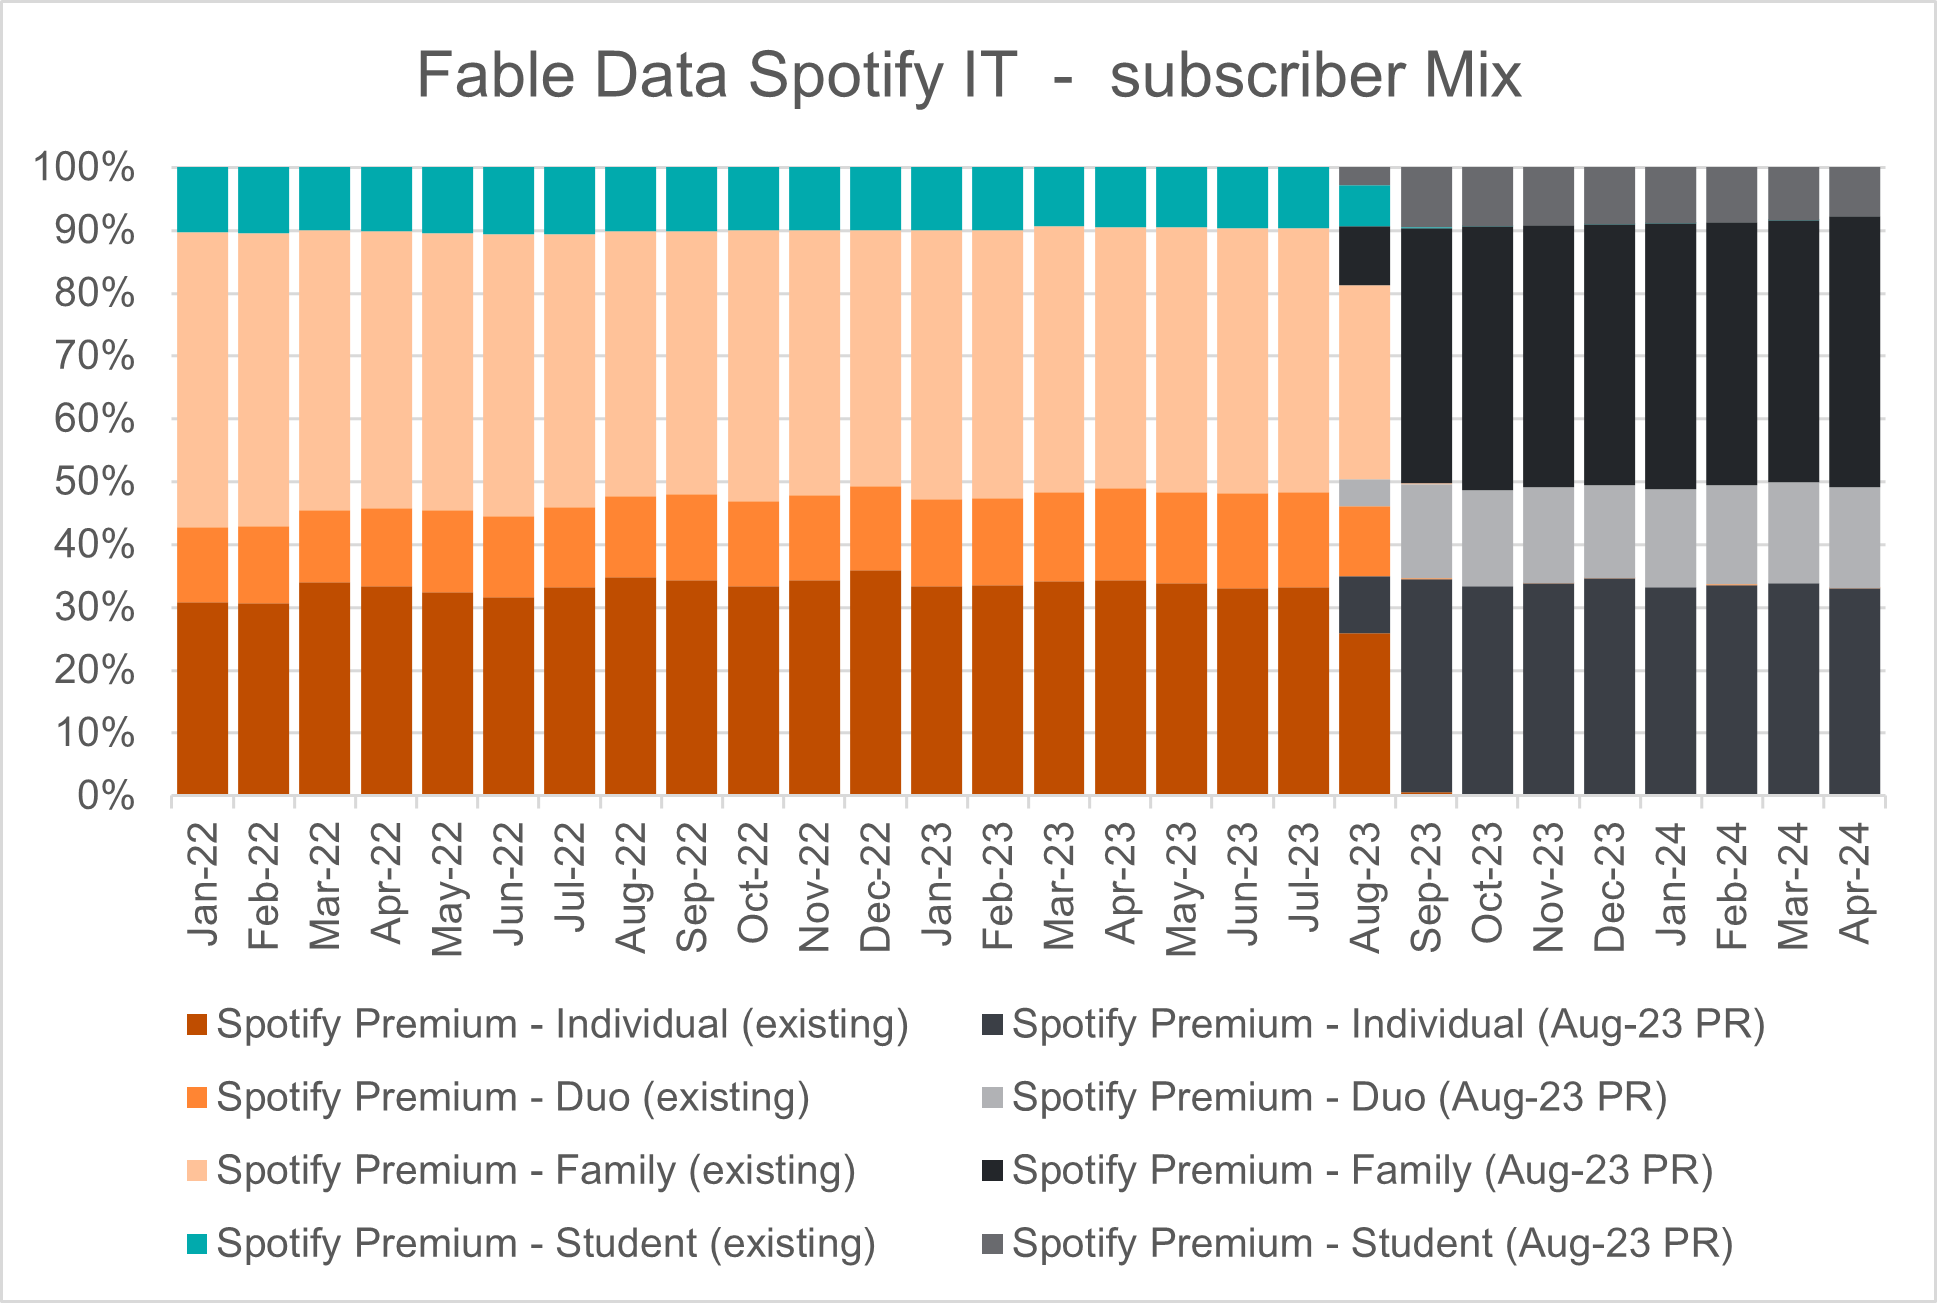 5 Fable Data Spotify UK IT subscriber mix-1